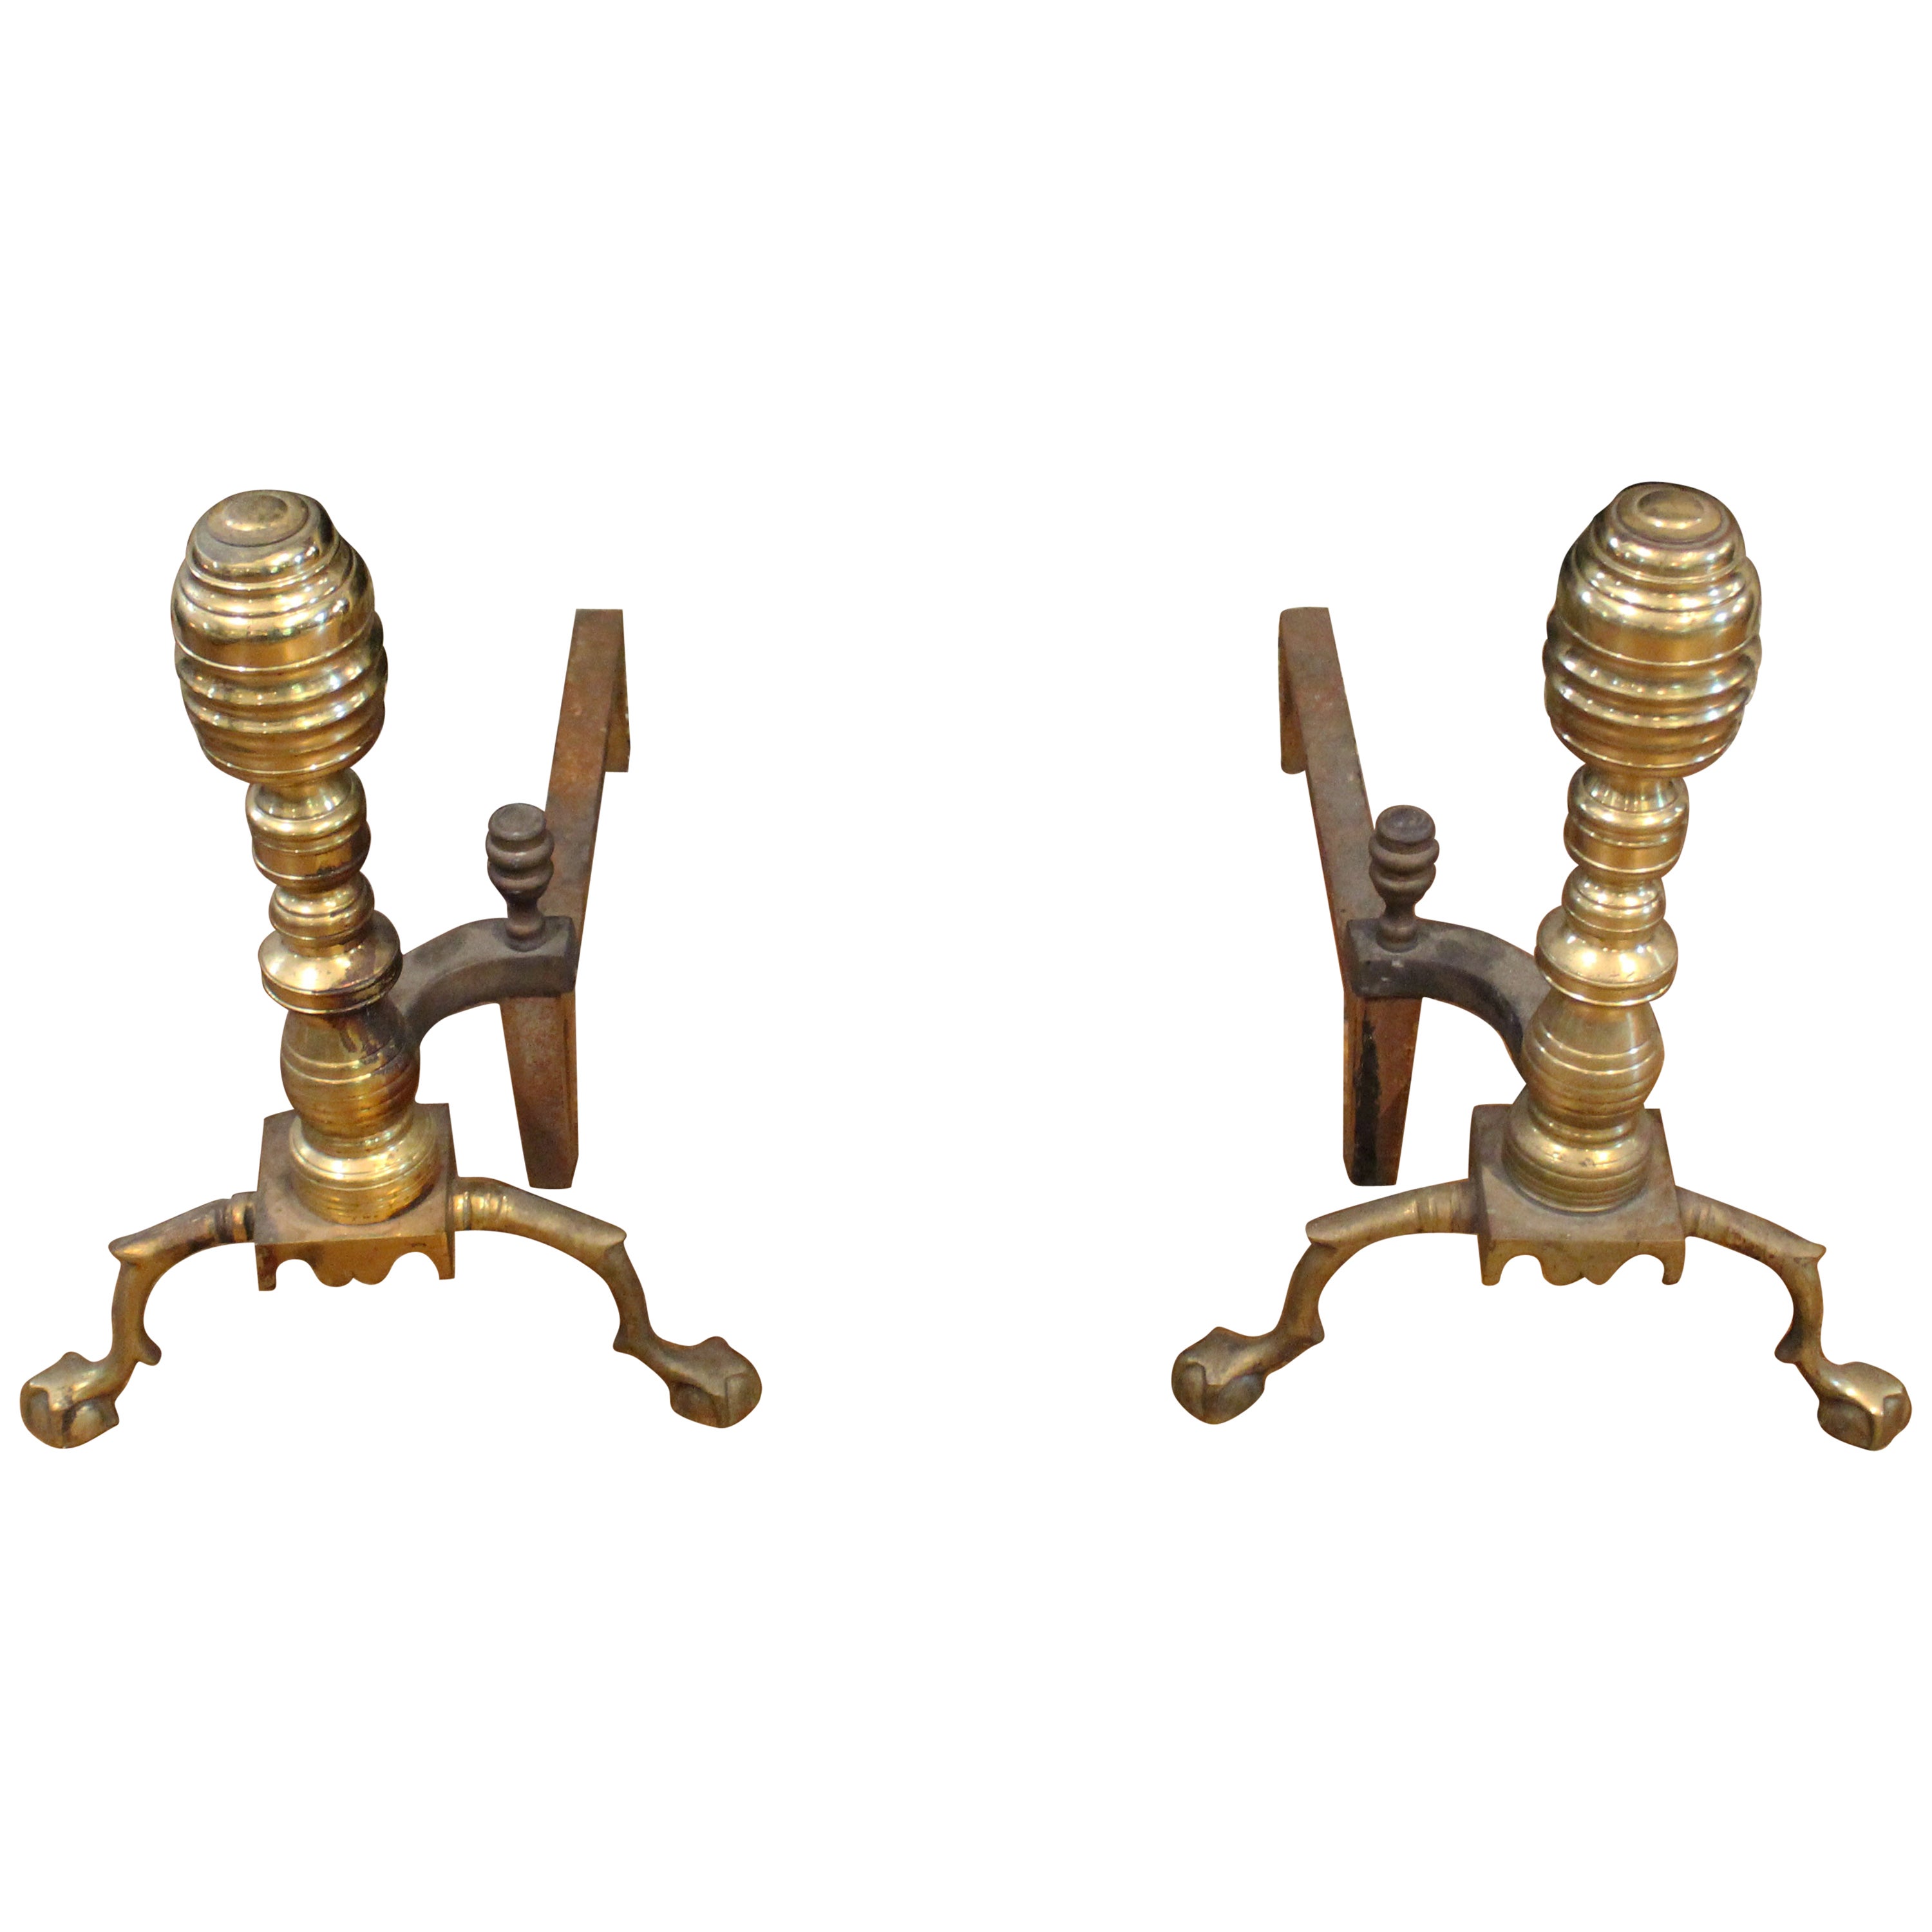 Pair of Mid-20th Brass Andirons in 18th Century Style